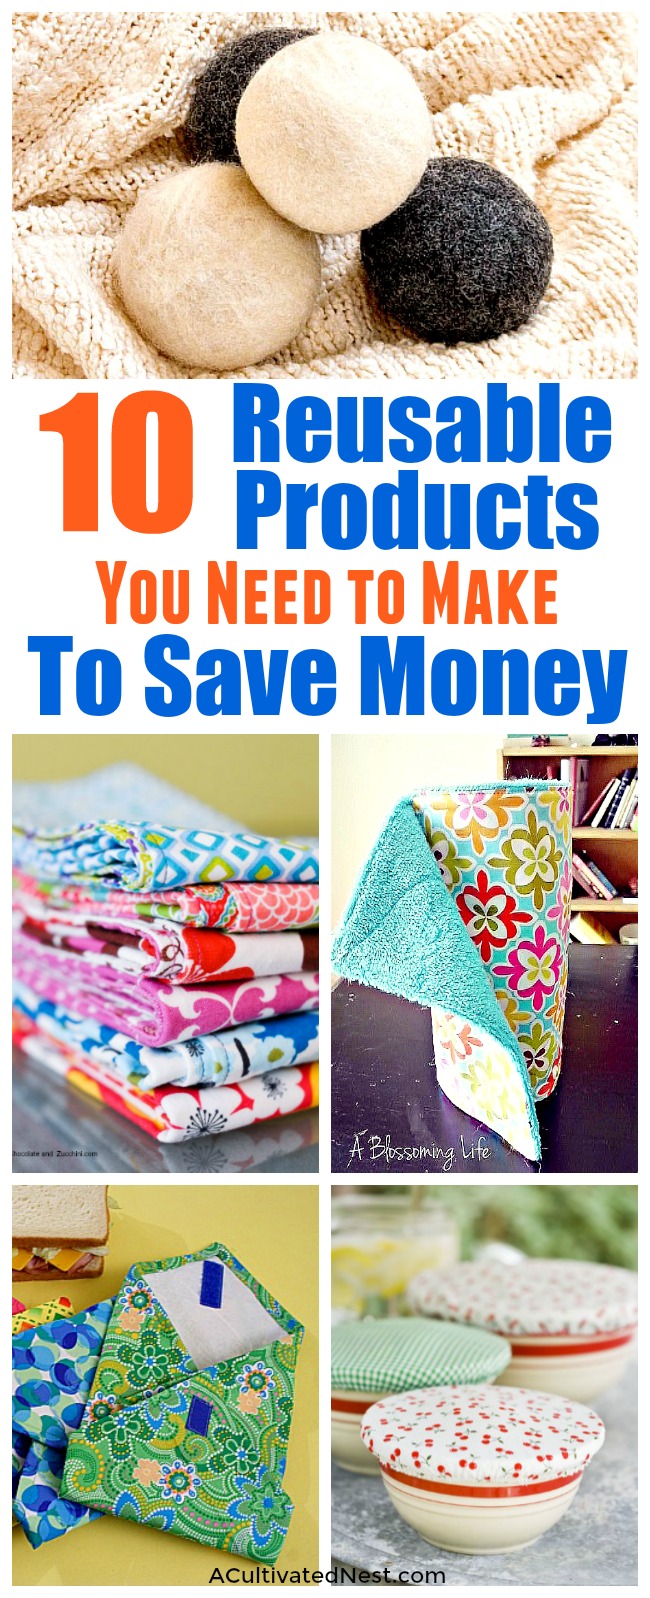 Disposable Products You Can Replace with Reusable Ones- You can save money and help the environment at the same time by making these DIY reusable products! They're so easy to make, and you can use your favorite colors! | environmentally friendly, eco friendly, frugal, sewing, ways to save money, wool dryer balls, cloth paper towels, unpaper towels, #diy #frugalLiving #saveMoney #moneySaving